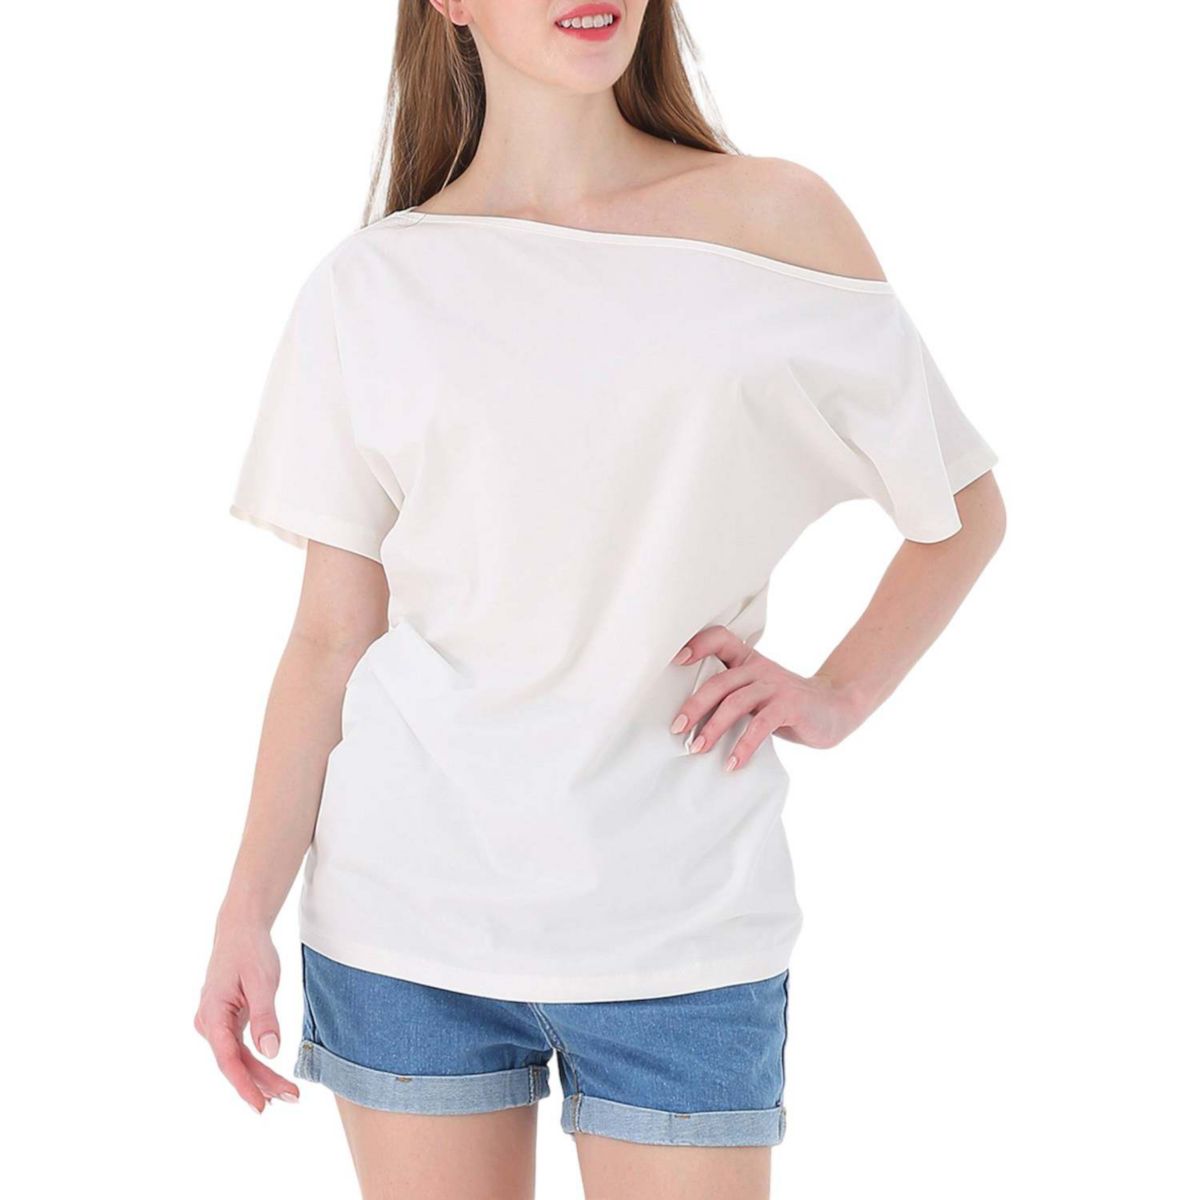 Women's Solid Cotton Stretchy Off Shoulder Casual T-shirt Blouse Anna-Kaci